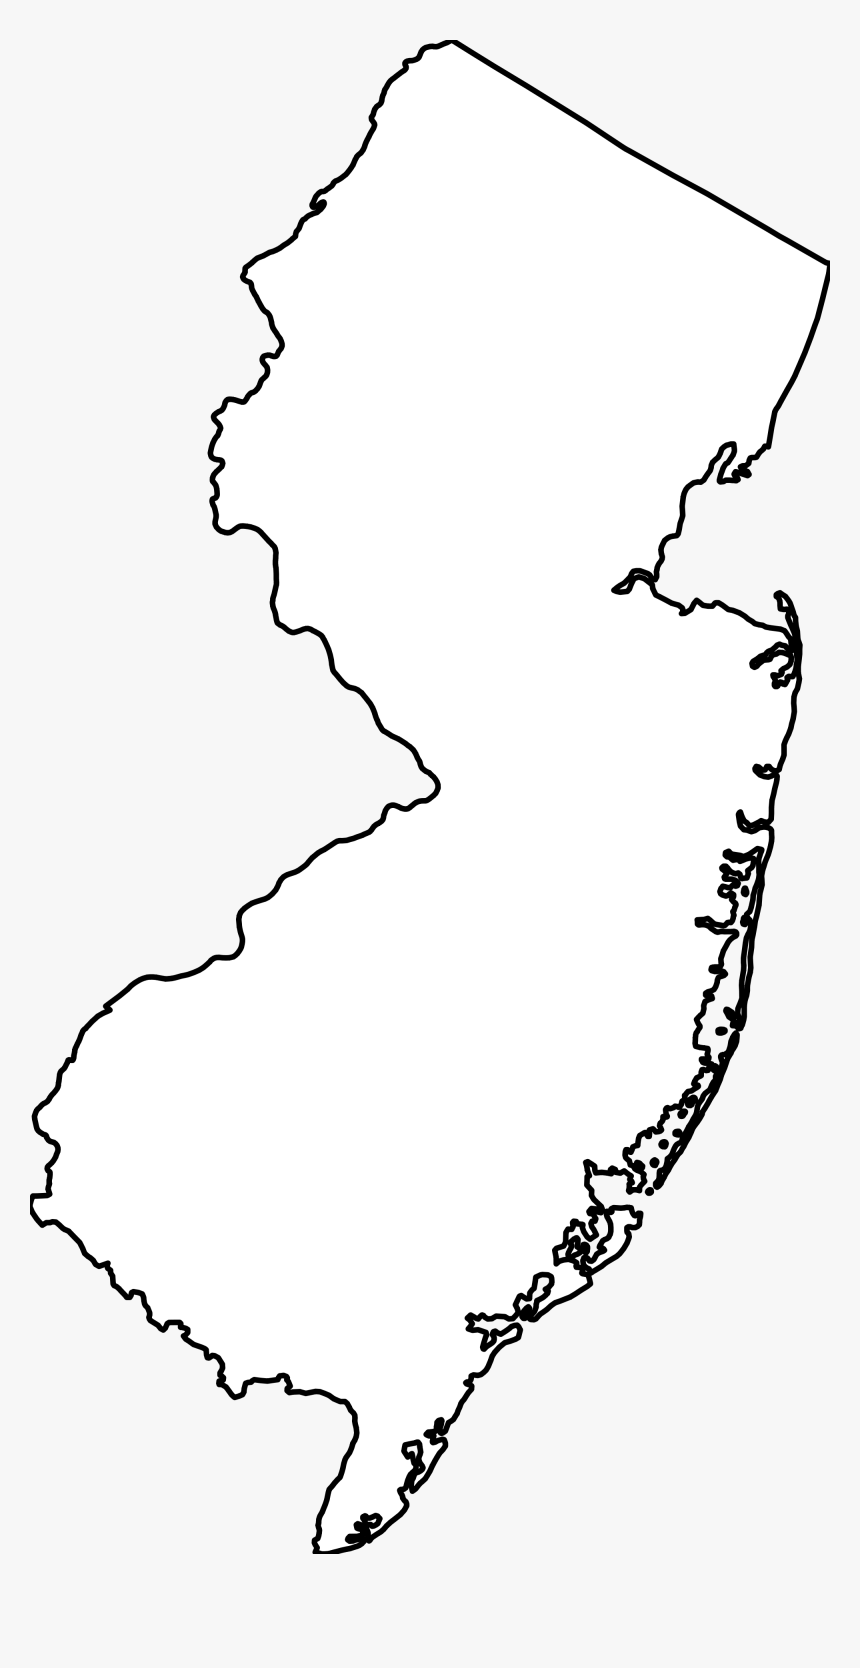 Clip Art New Jersey Outline Png - New Jersey Colony Map Outline, Transparent Png, Free Download